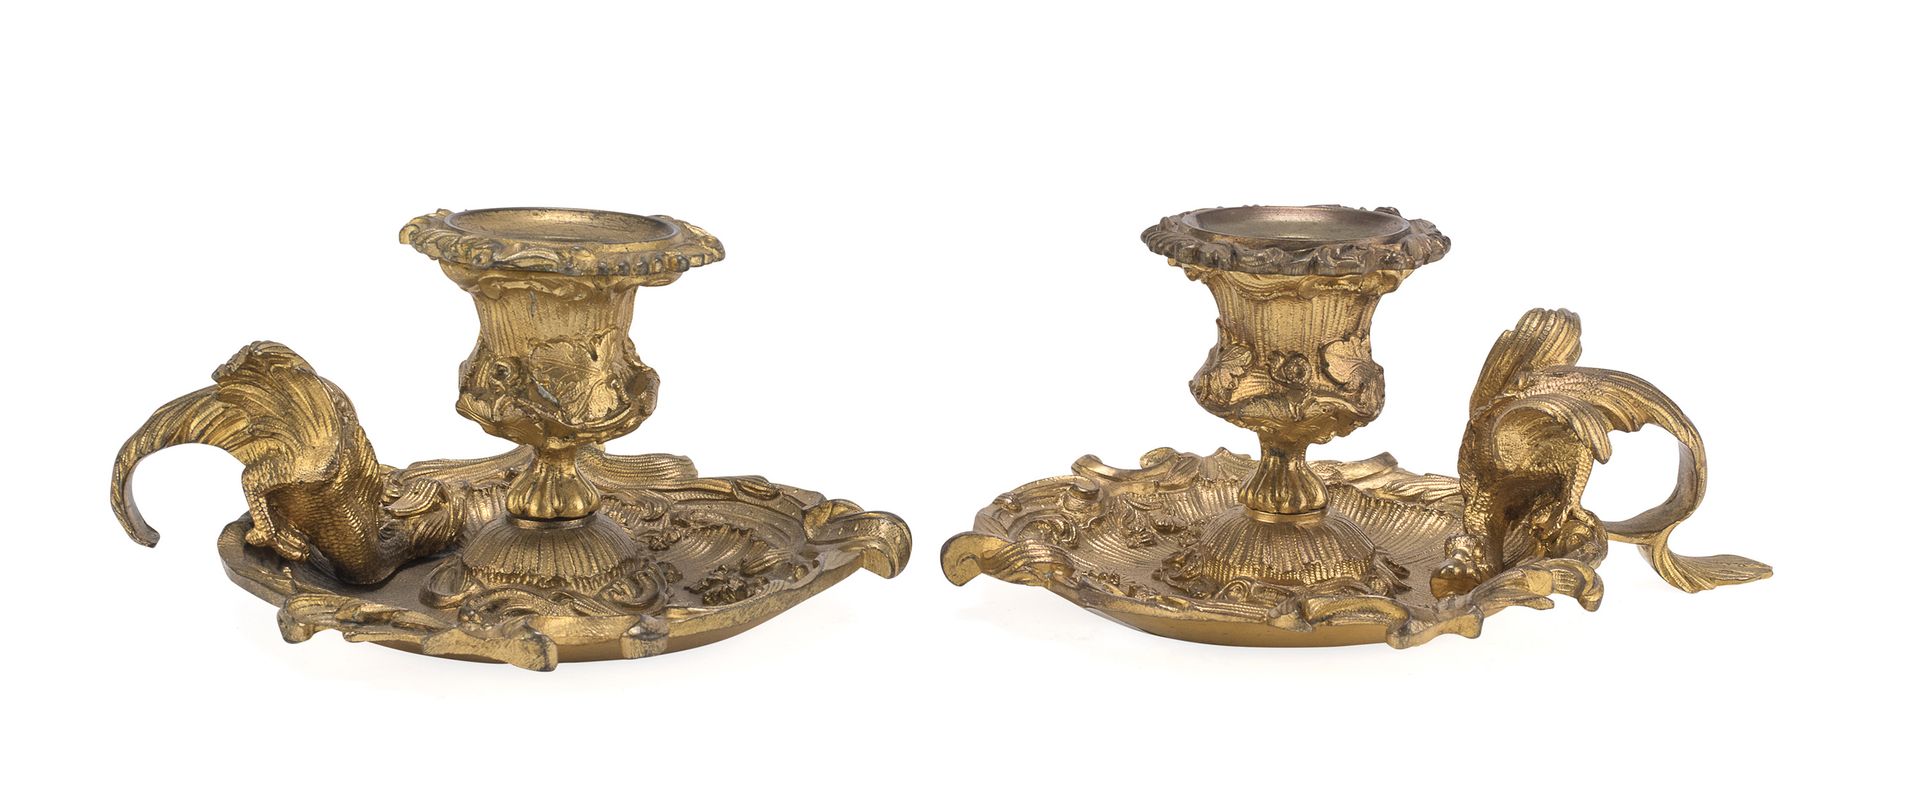 Null BEAUTIFUL PAIR OF SMALL CANDLESTICKS IN GILDED BRONZE, 19th CENTURY